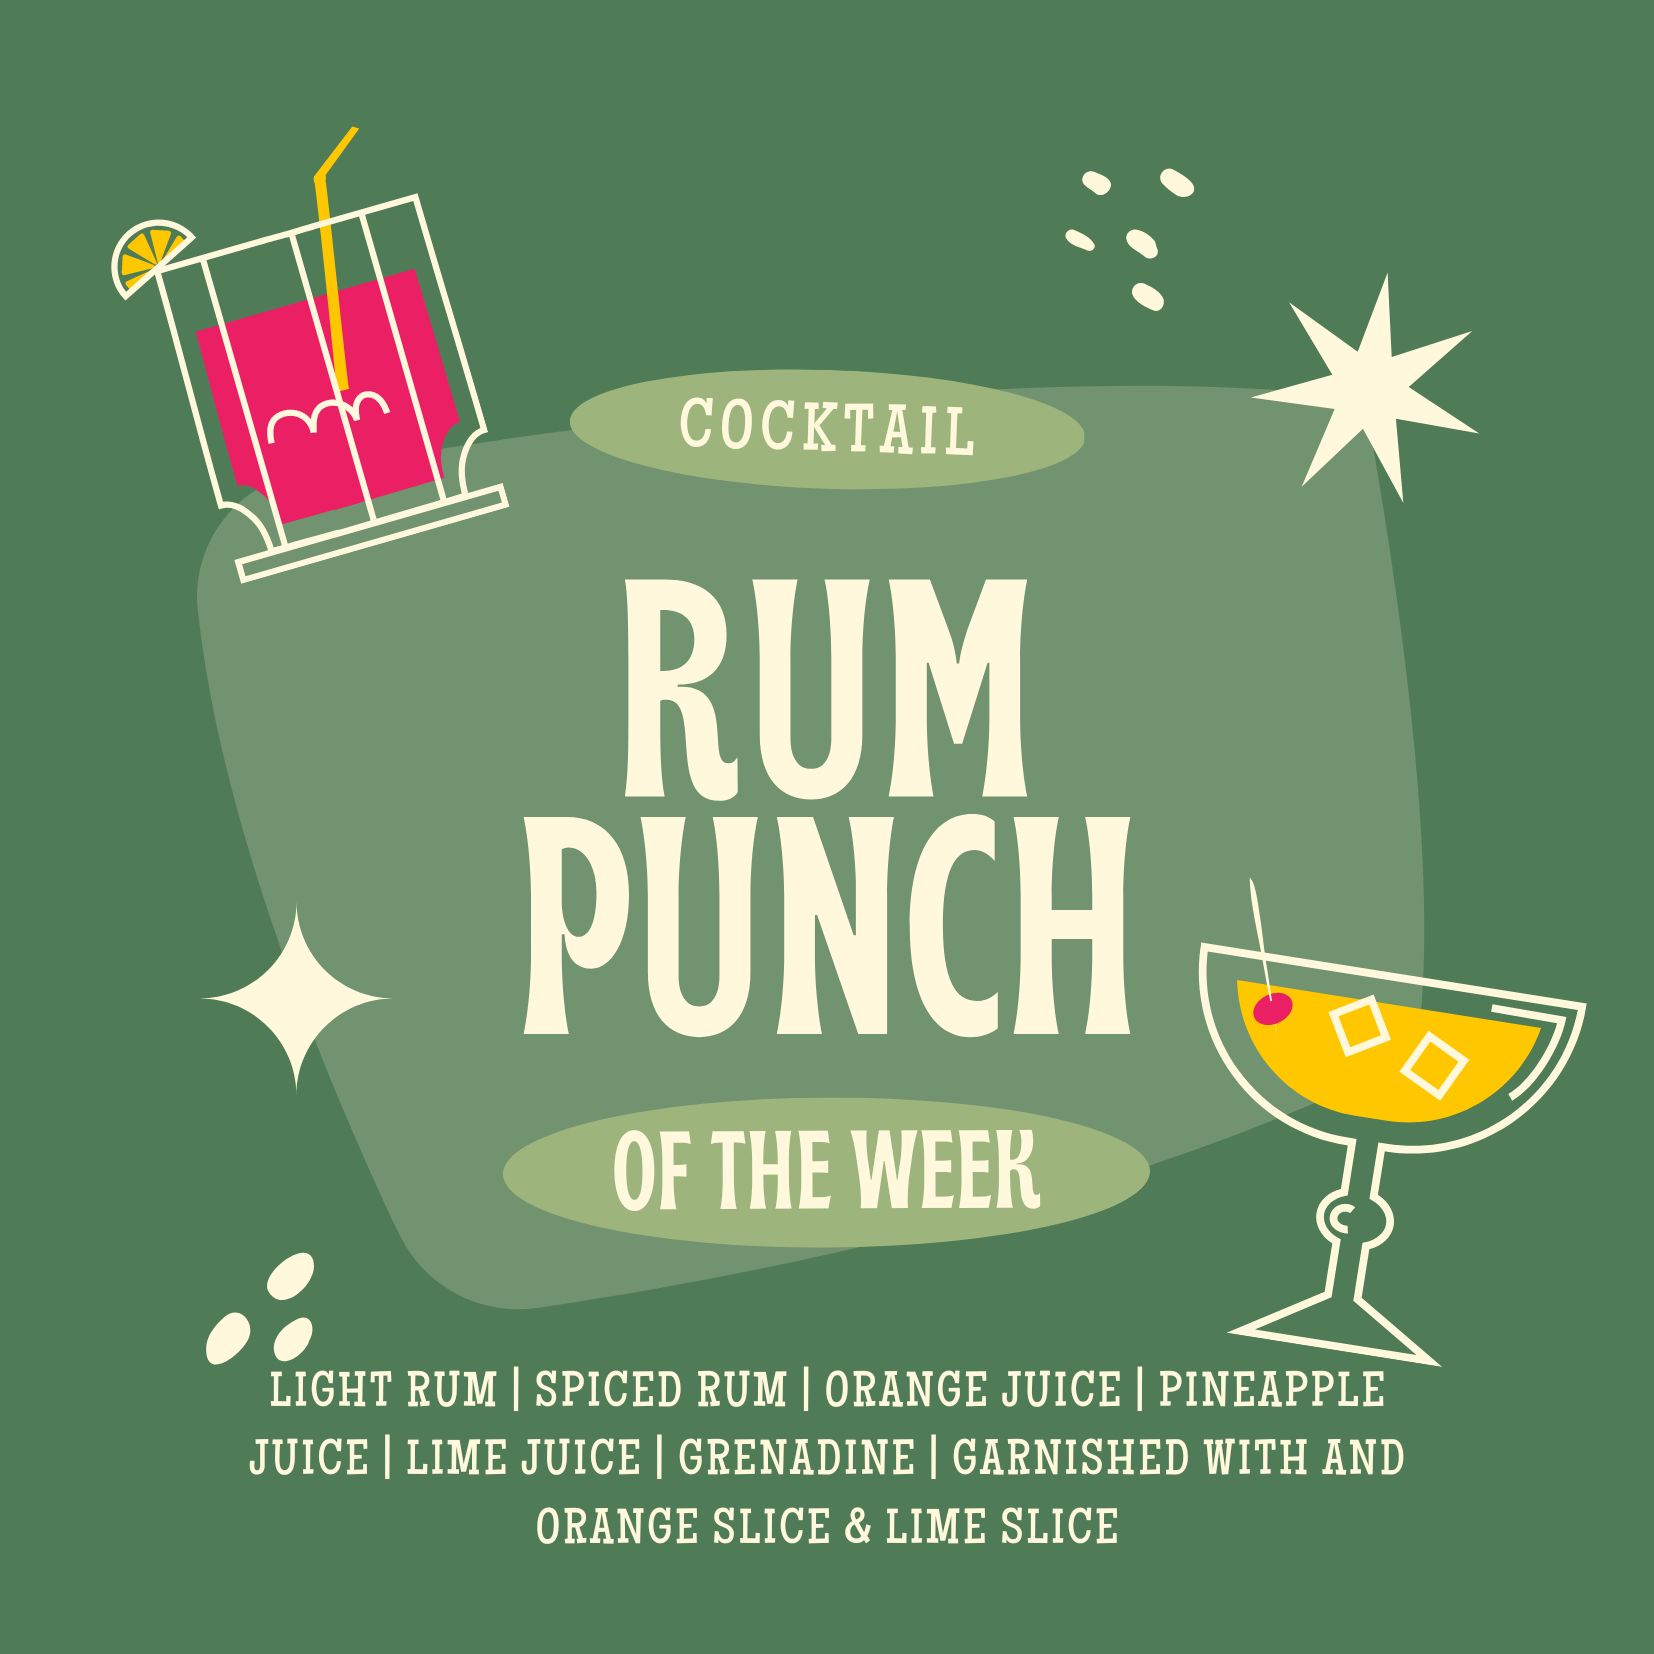 RUM PUNCH IS THE COCKTAIL OF THE WEEK AT HEMAUER BREWING CO., LOCATED NEAR DILLSBURG, PA.